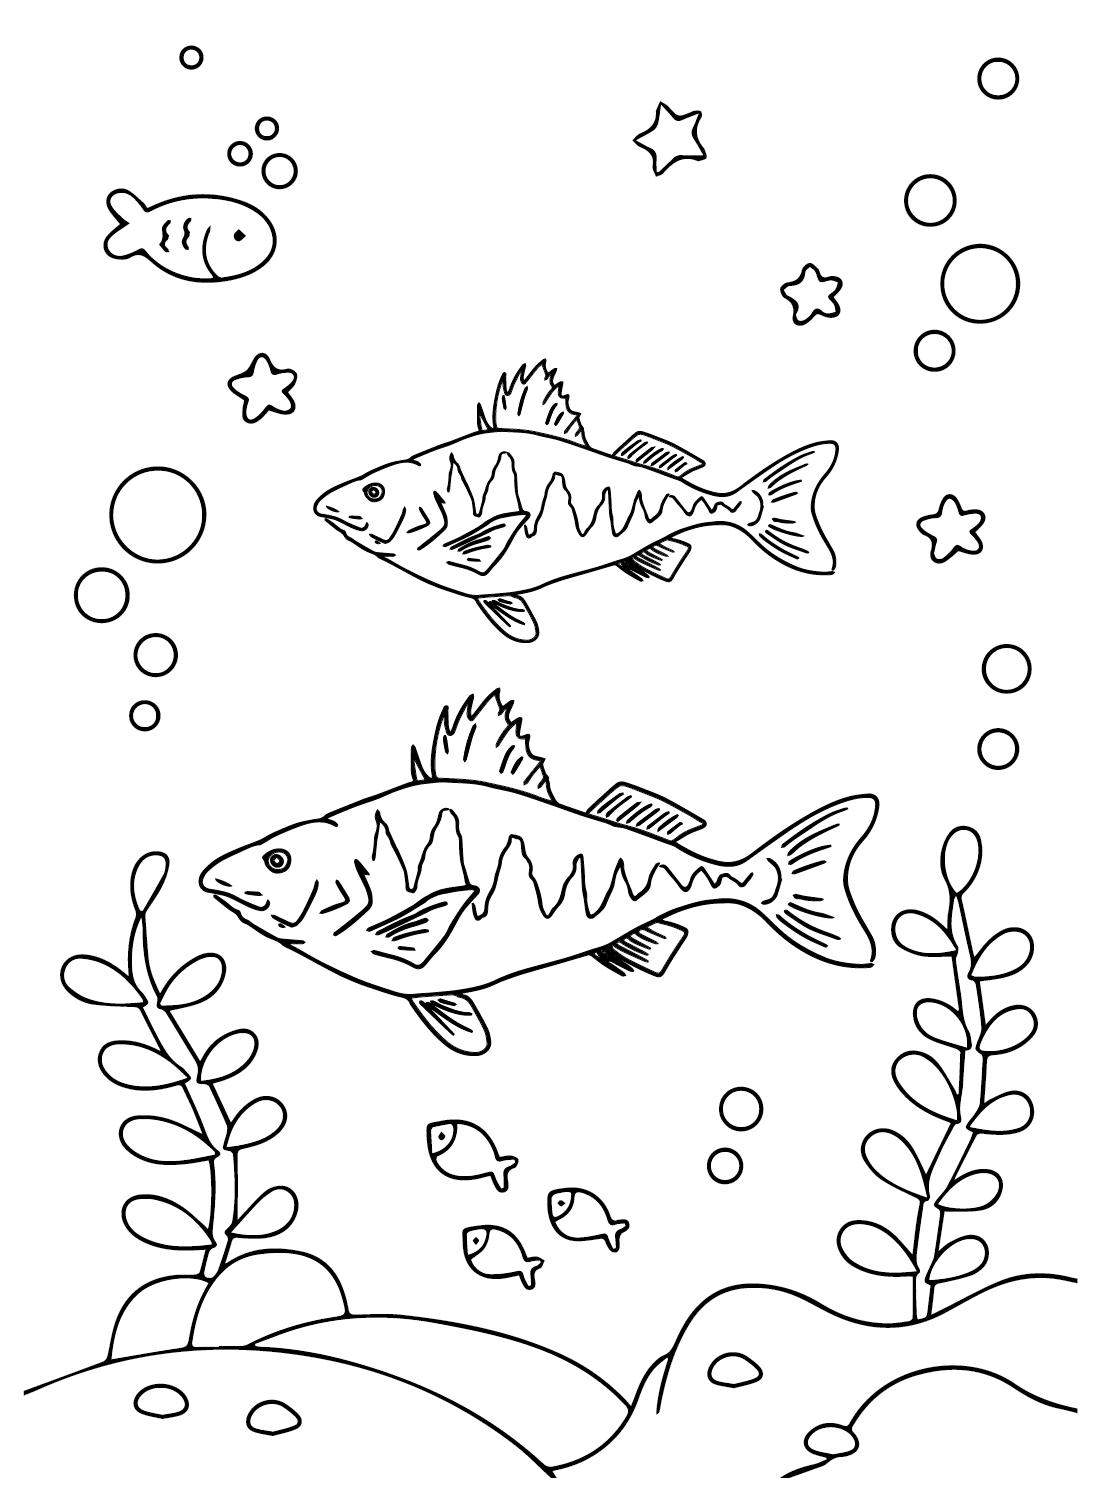 Basses Fish to Color from Bass Fish